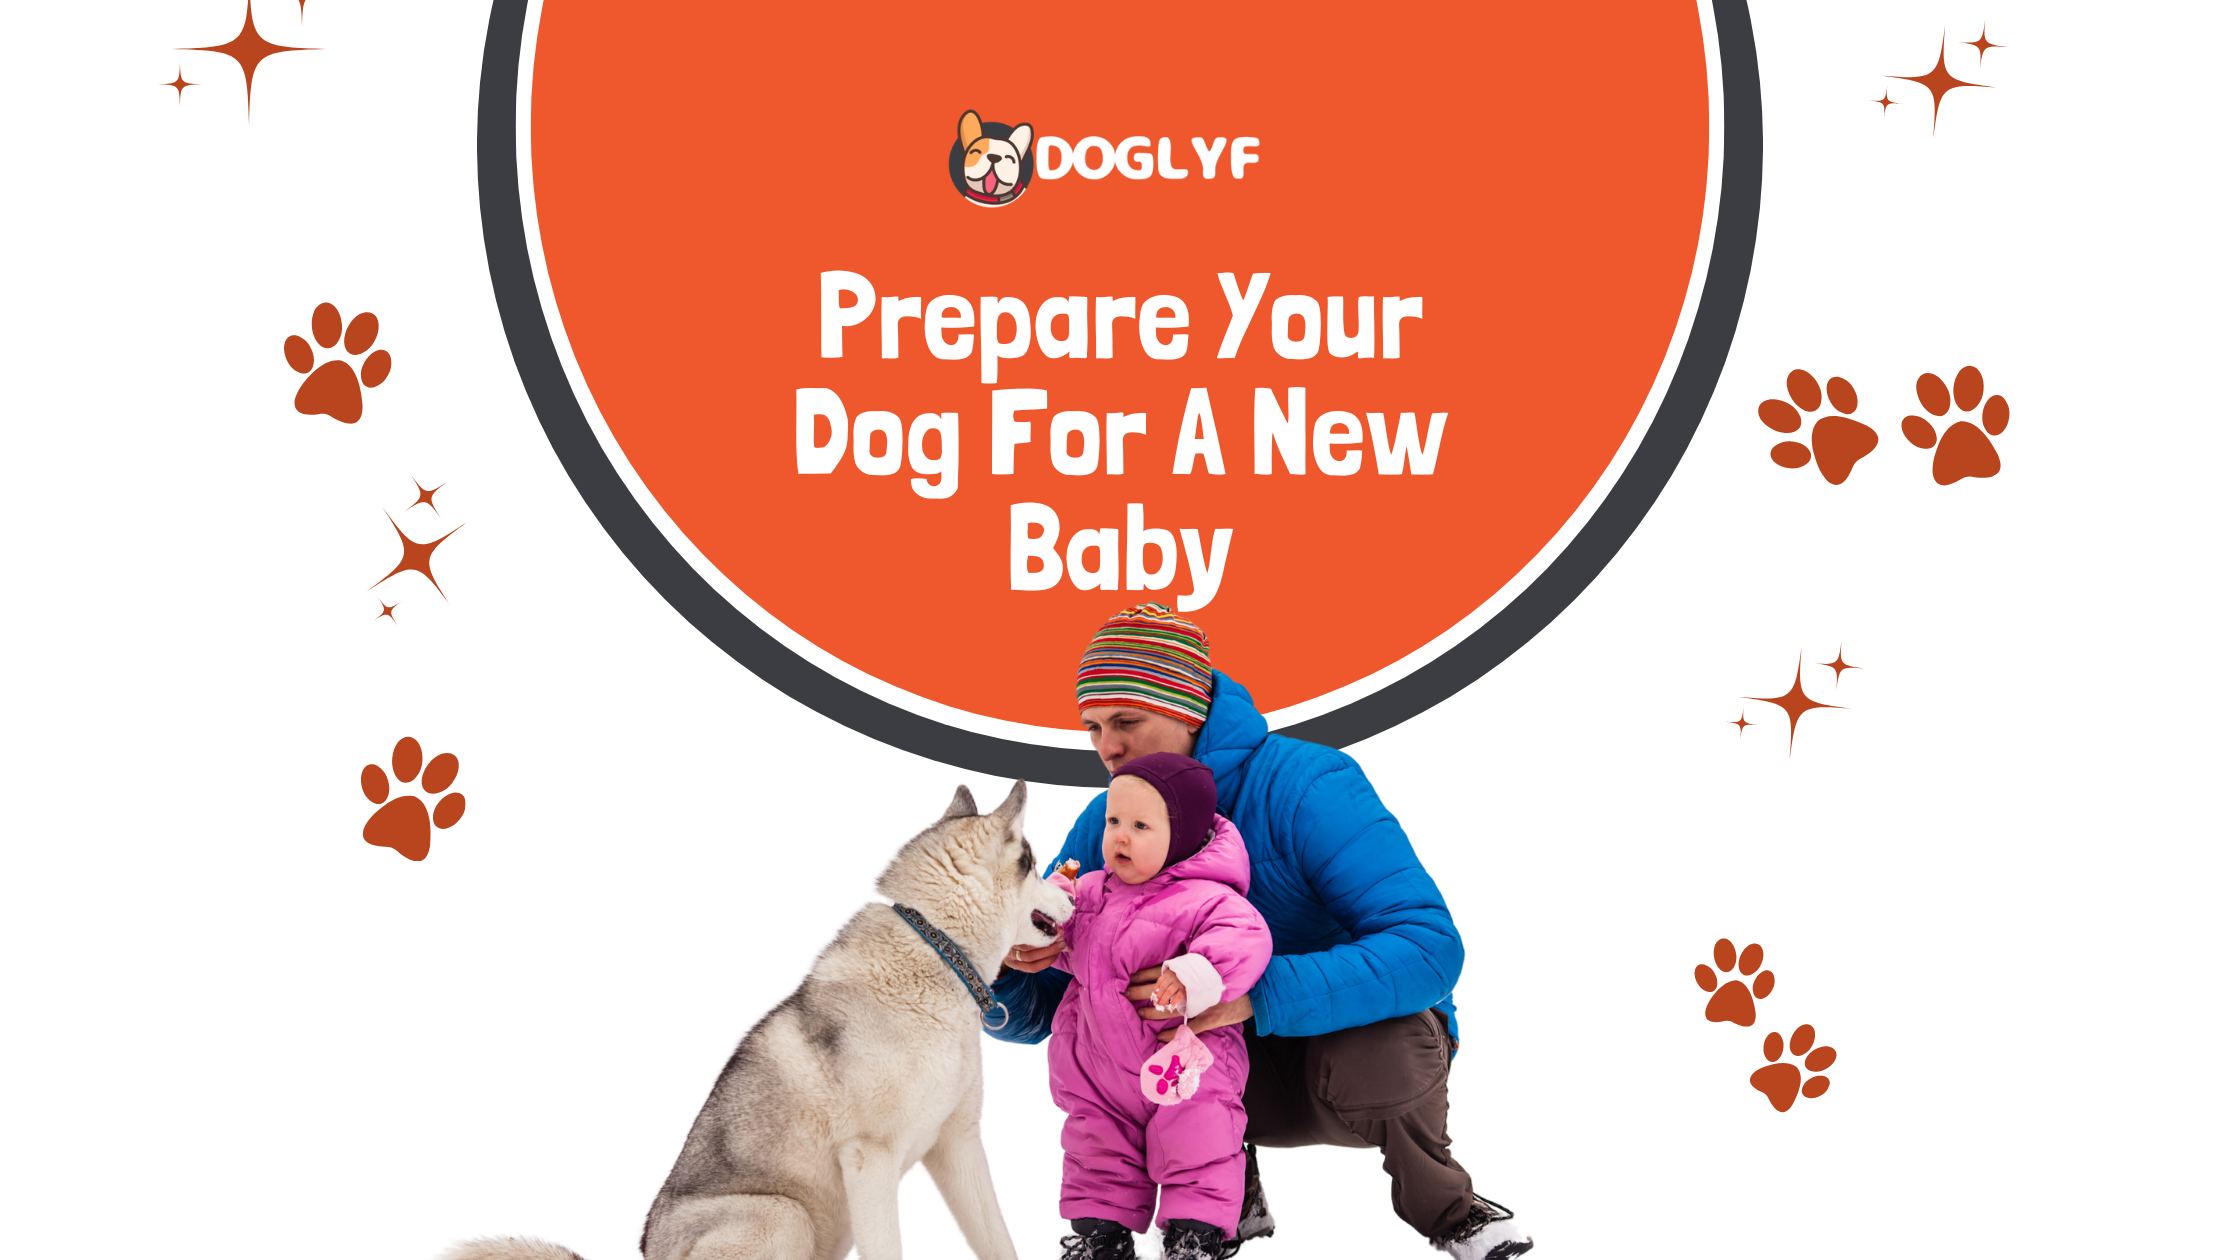 Prepare Your Dog For A New Baby